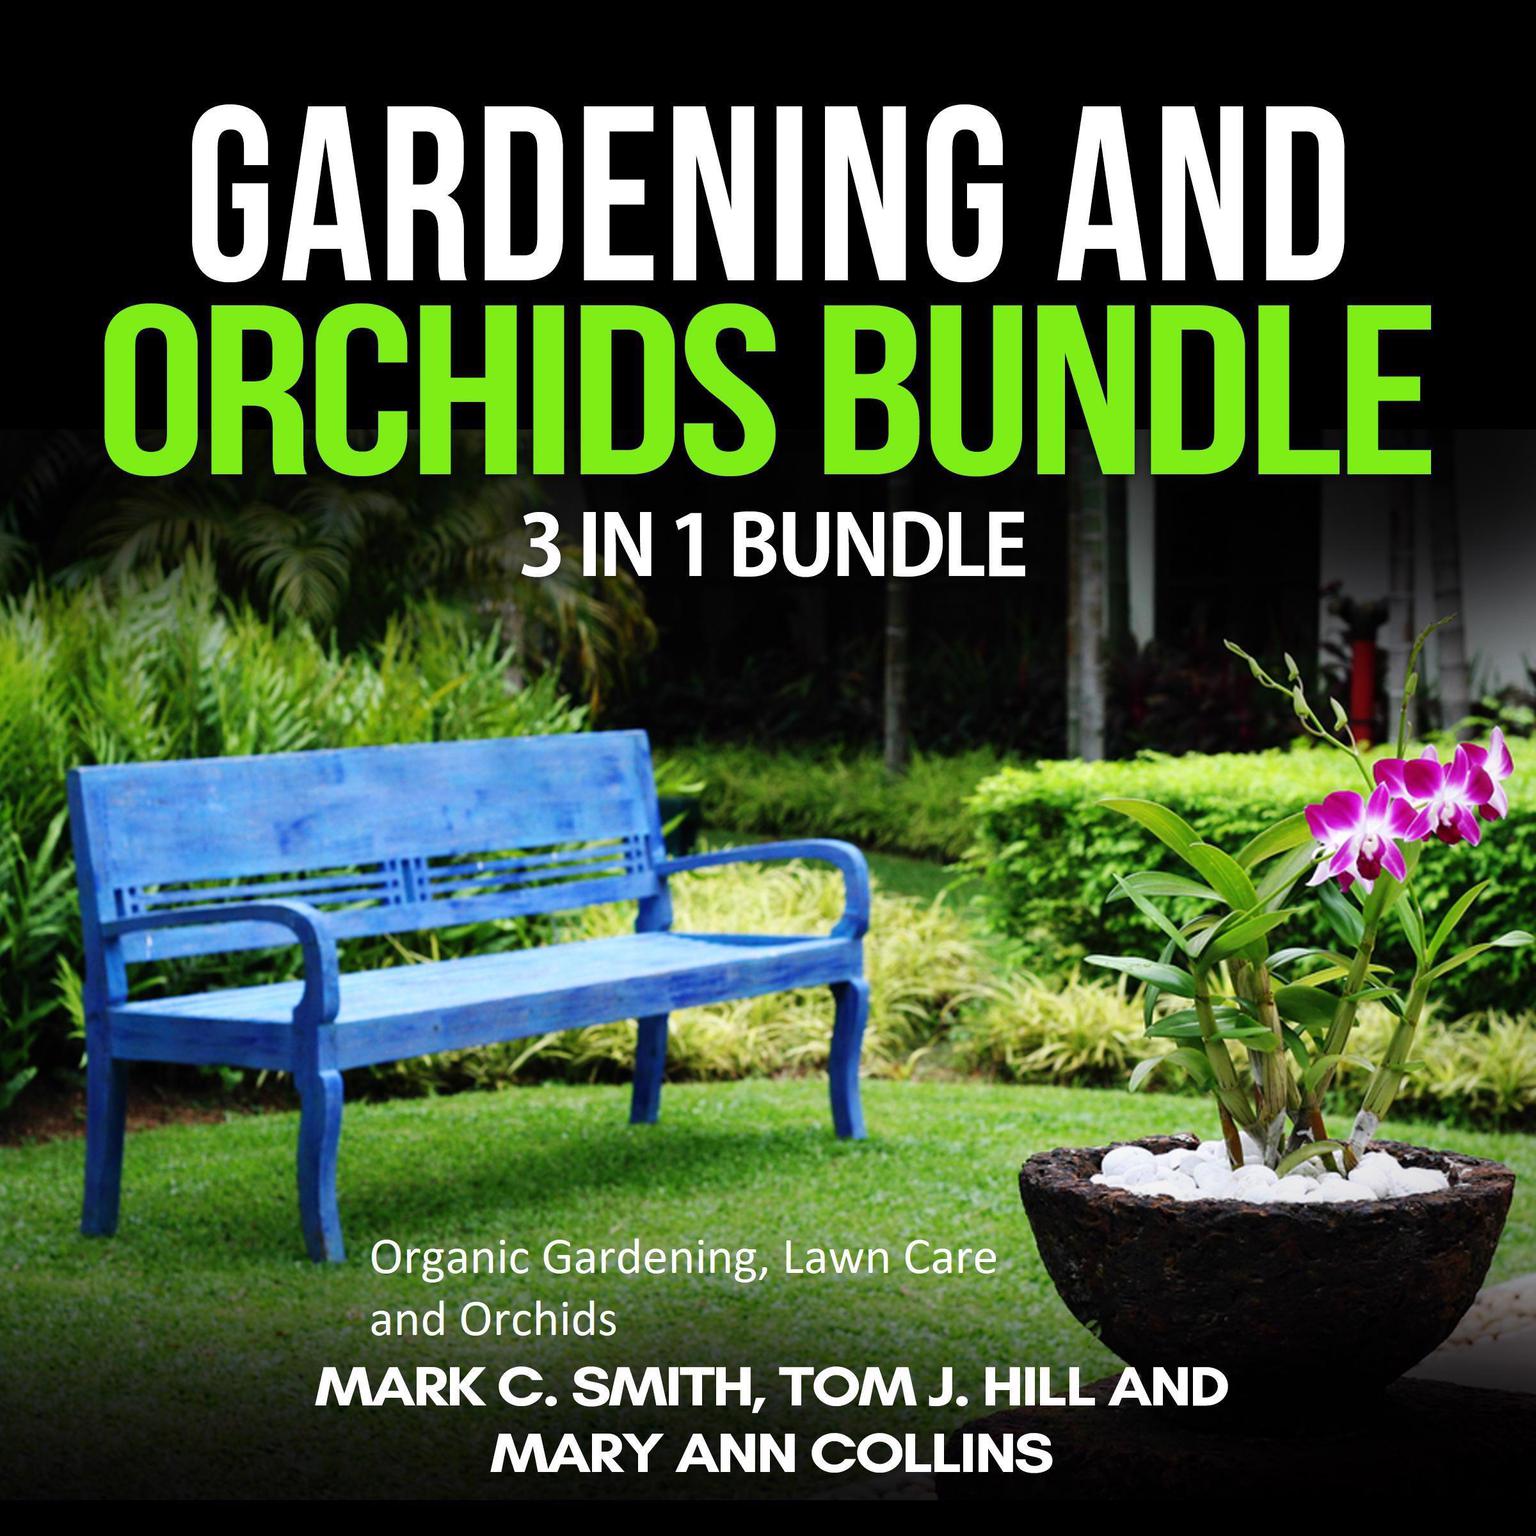 Gardening and Orchids Bundle: 3 in 1 Bundle, Organic Gardening, Lawn Care, Orchids Audiobook, by Mary Ann Collins